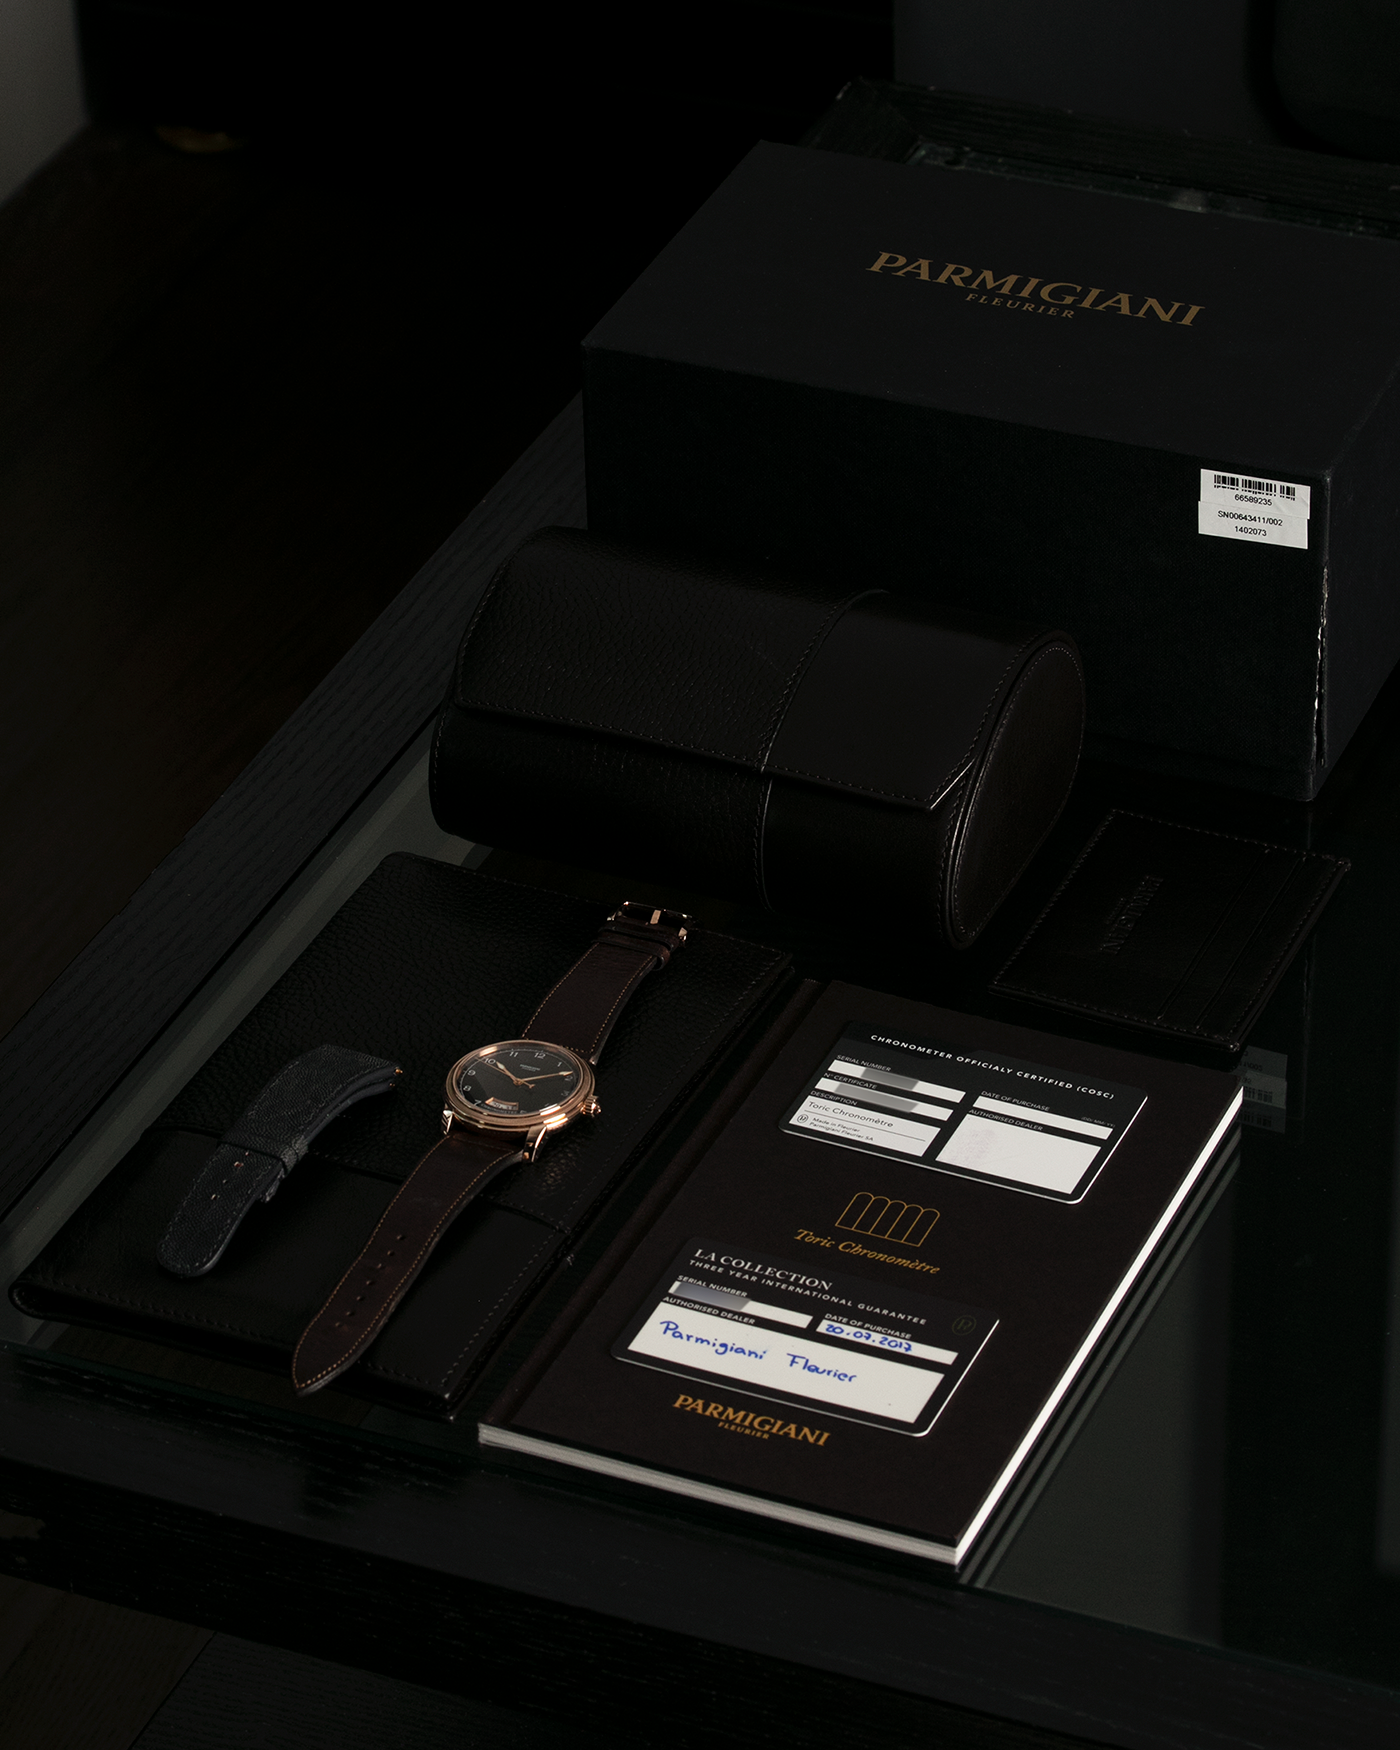 Brand: Parmigiani Fleurier Year: 2017 Model: Toric Chronometre Material: 18-carat Rose Gold Movement: PF Cal. PF 331, Self-Winding Case Diameter: 40.8mm Strap: Accurate Form Dark Brown Leather Strap with Signed 18-carat Rose Gold Tang Buckle.